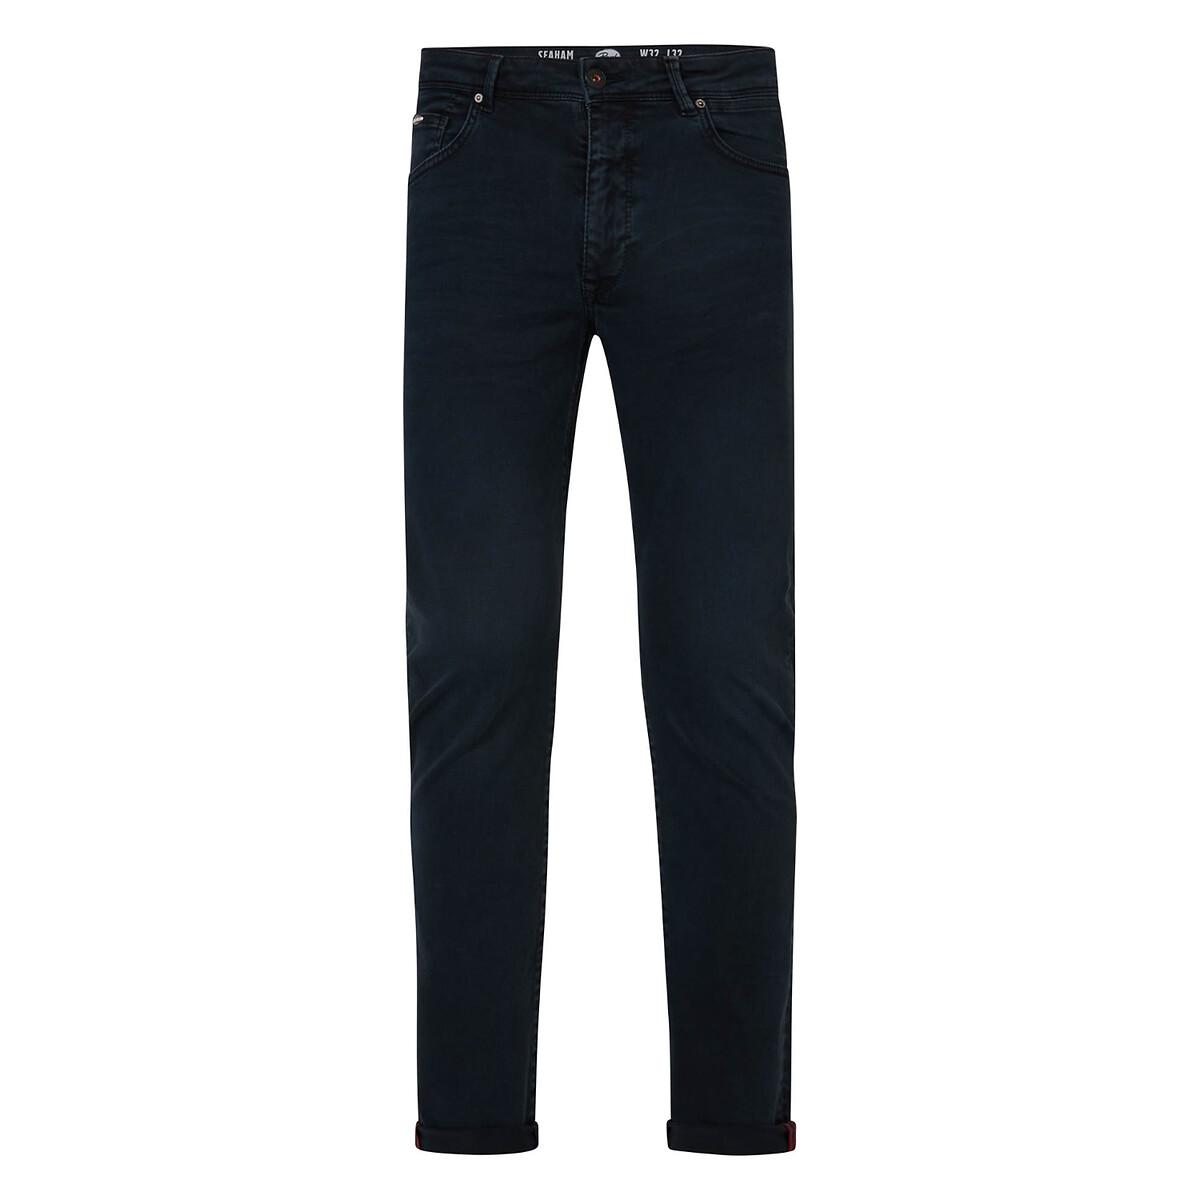 Supreme stretch seaham trousers in cotton and slim fit, dark blue, Petrol  Industries